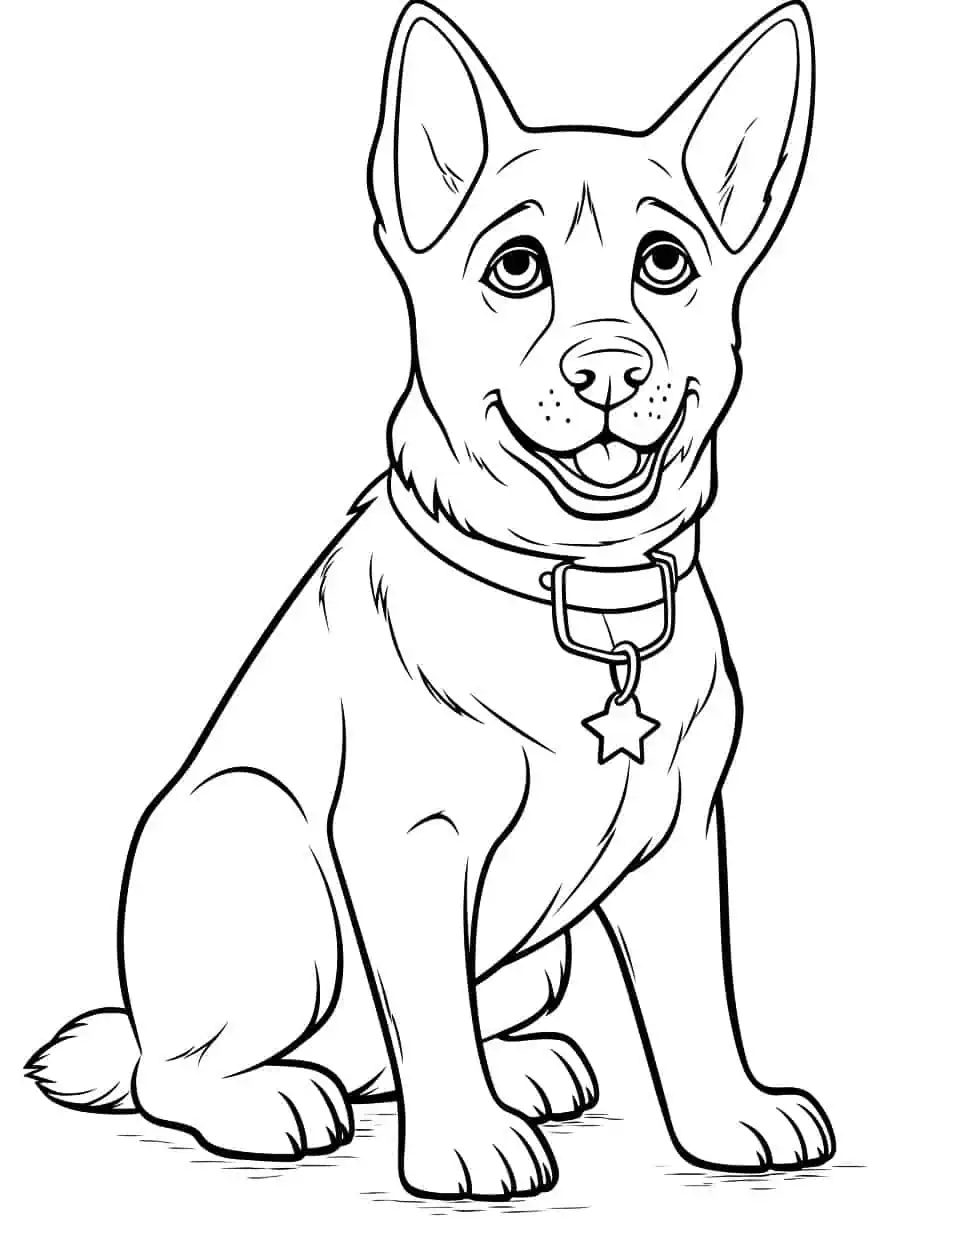 German Shepherd On Duty Coloring Page - A German Shepherd serving as a police dog, with a beautiful star collar.